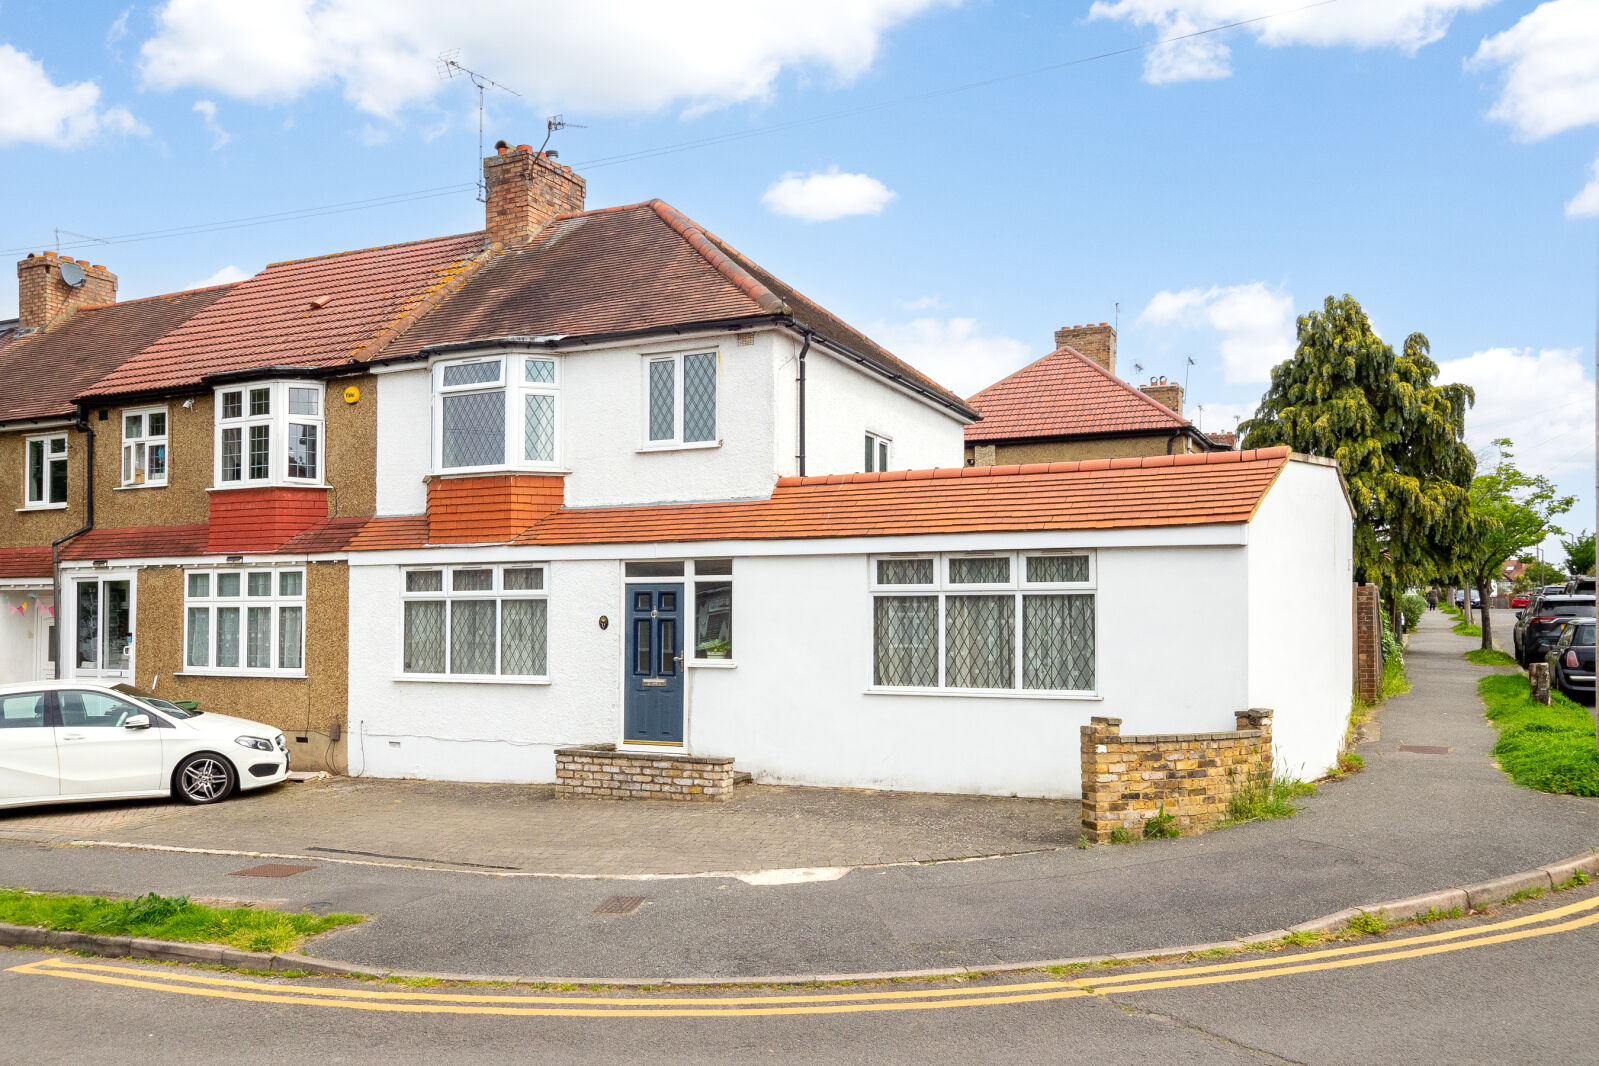 4 bedroom end terraced house for sale Kingsdown Road, Cheam, SM3, main image